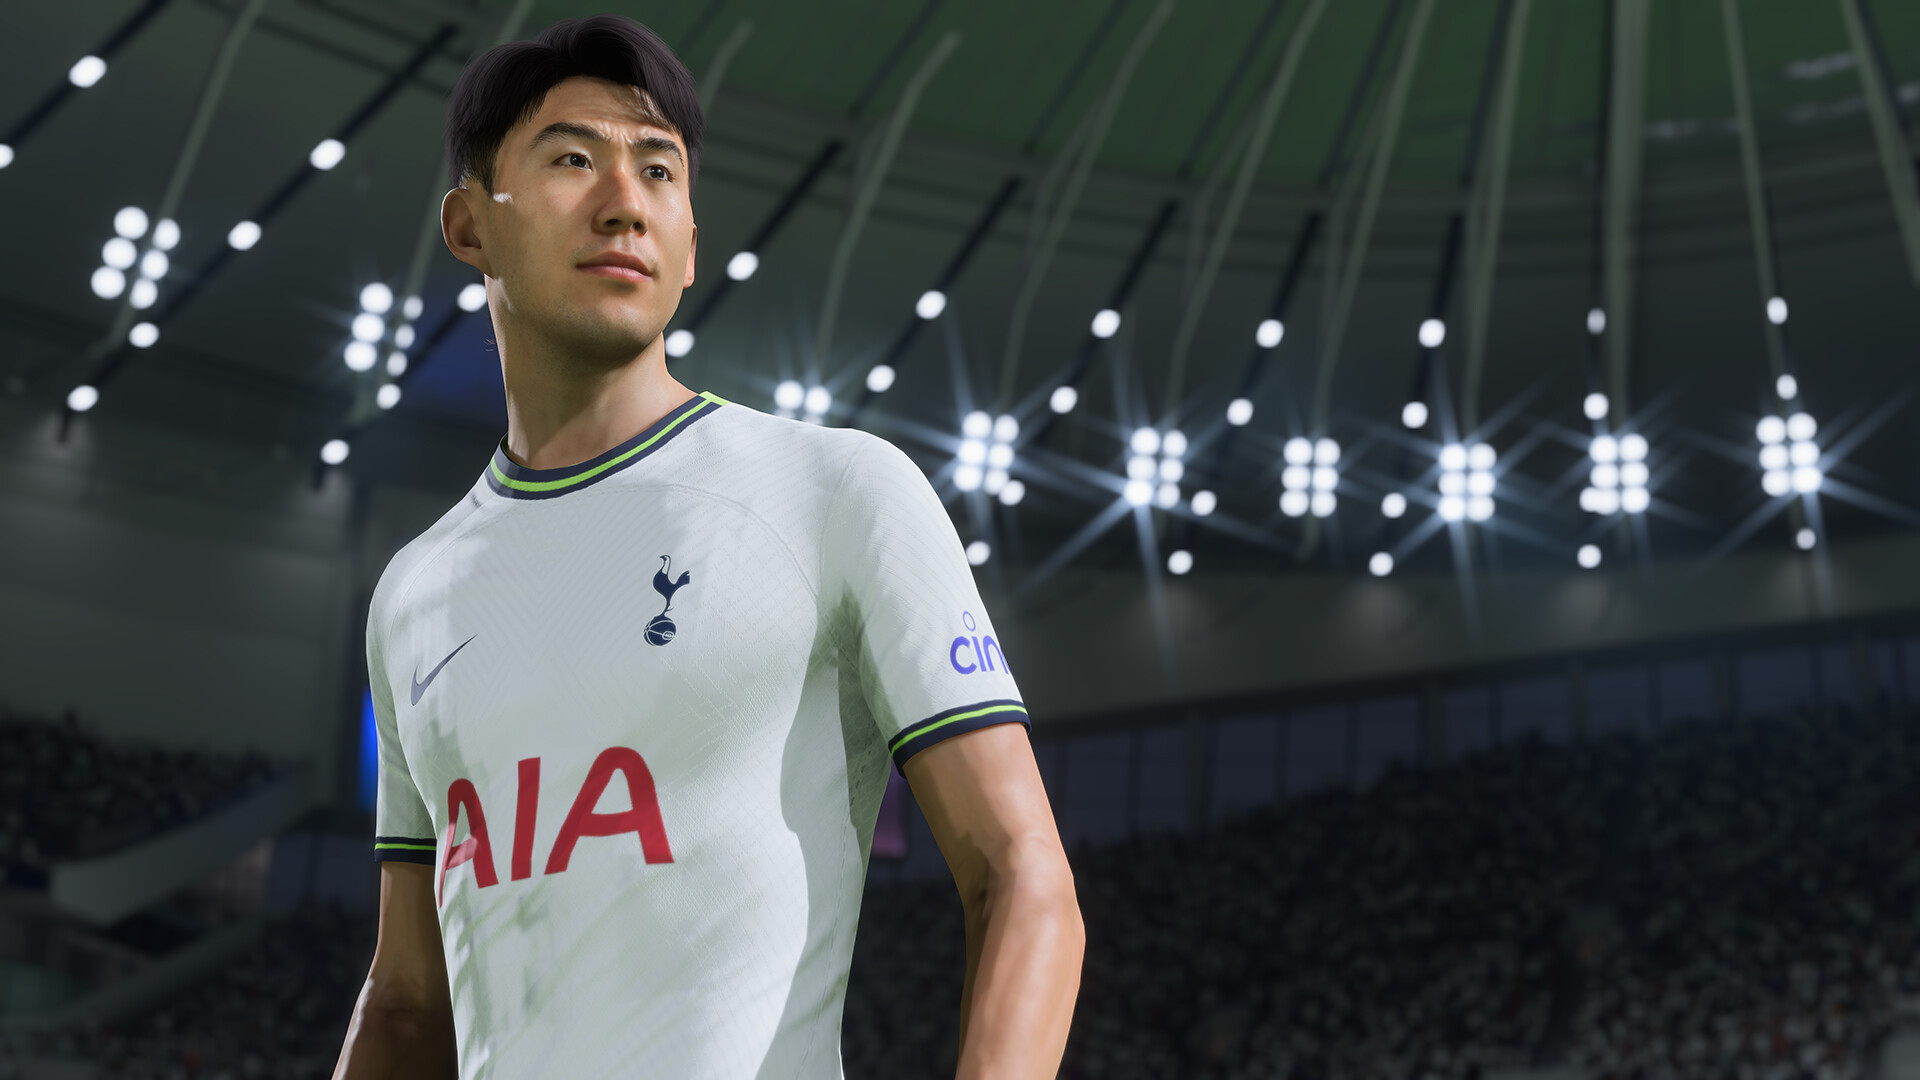 FIFA 23 Live Tuning Update Available Now - More Yellow Cards